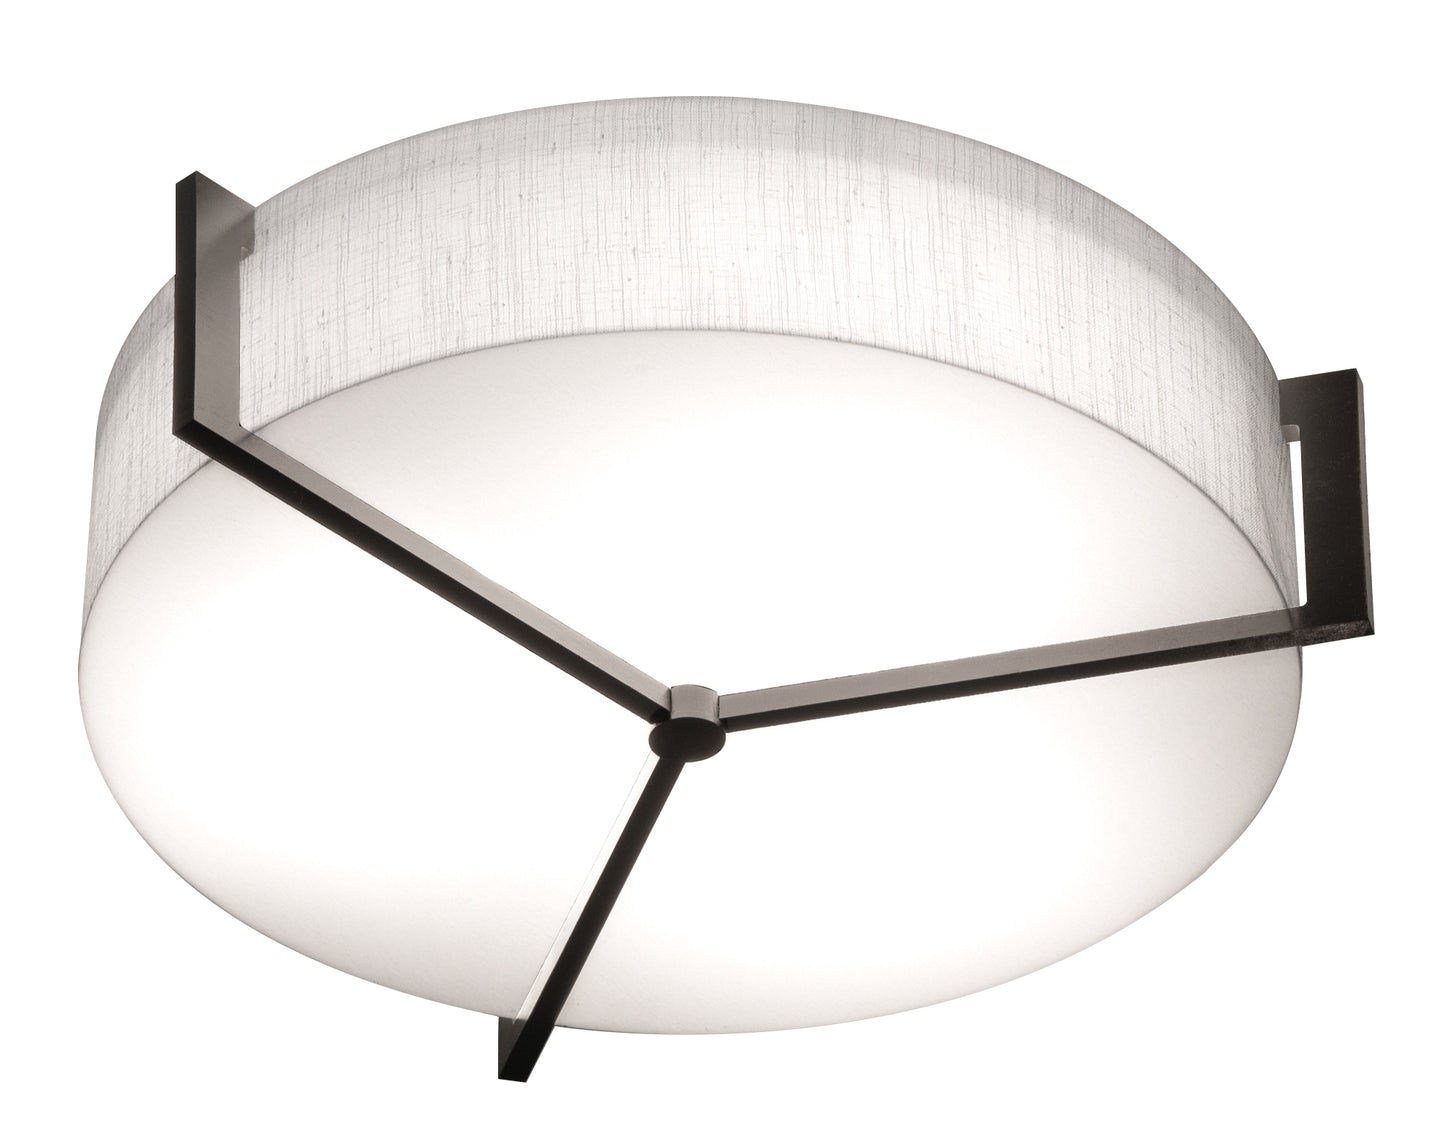 AFX Inc. APF1214LAJUDES-LW Apex Ceiling, 14 inch, Espresso Finish with Linen White Shade